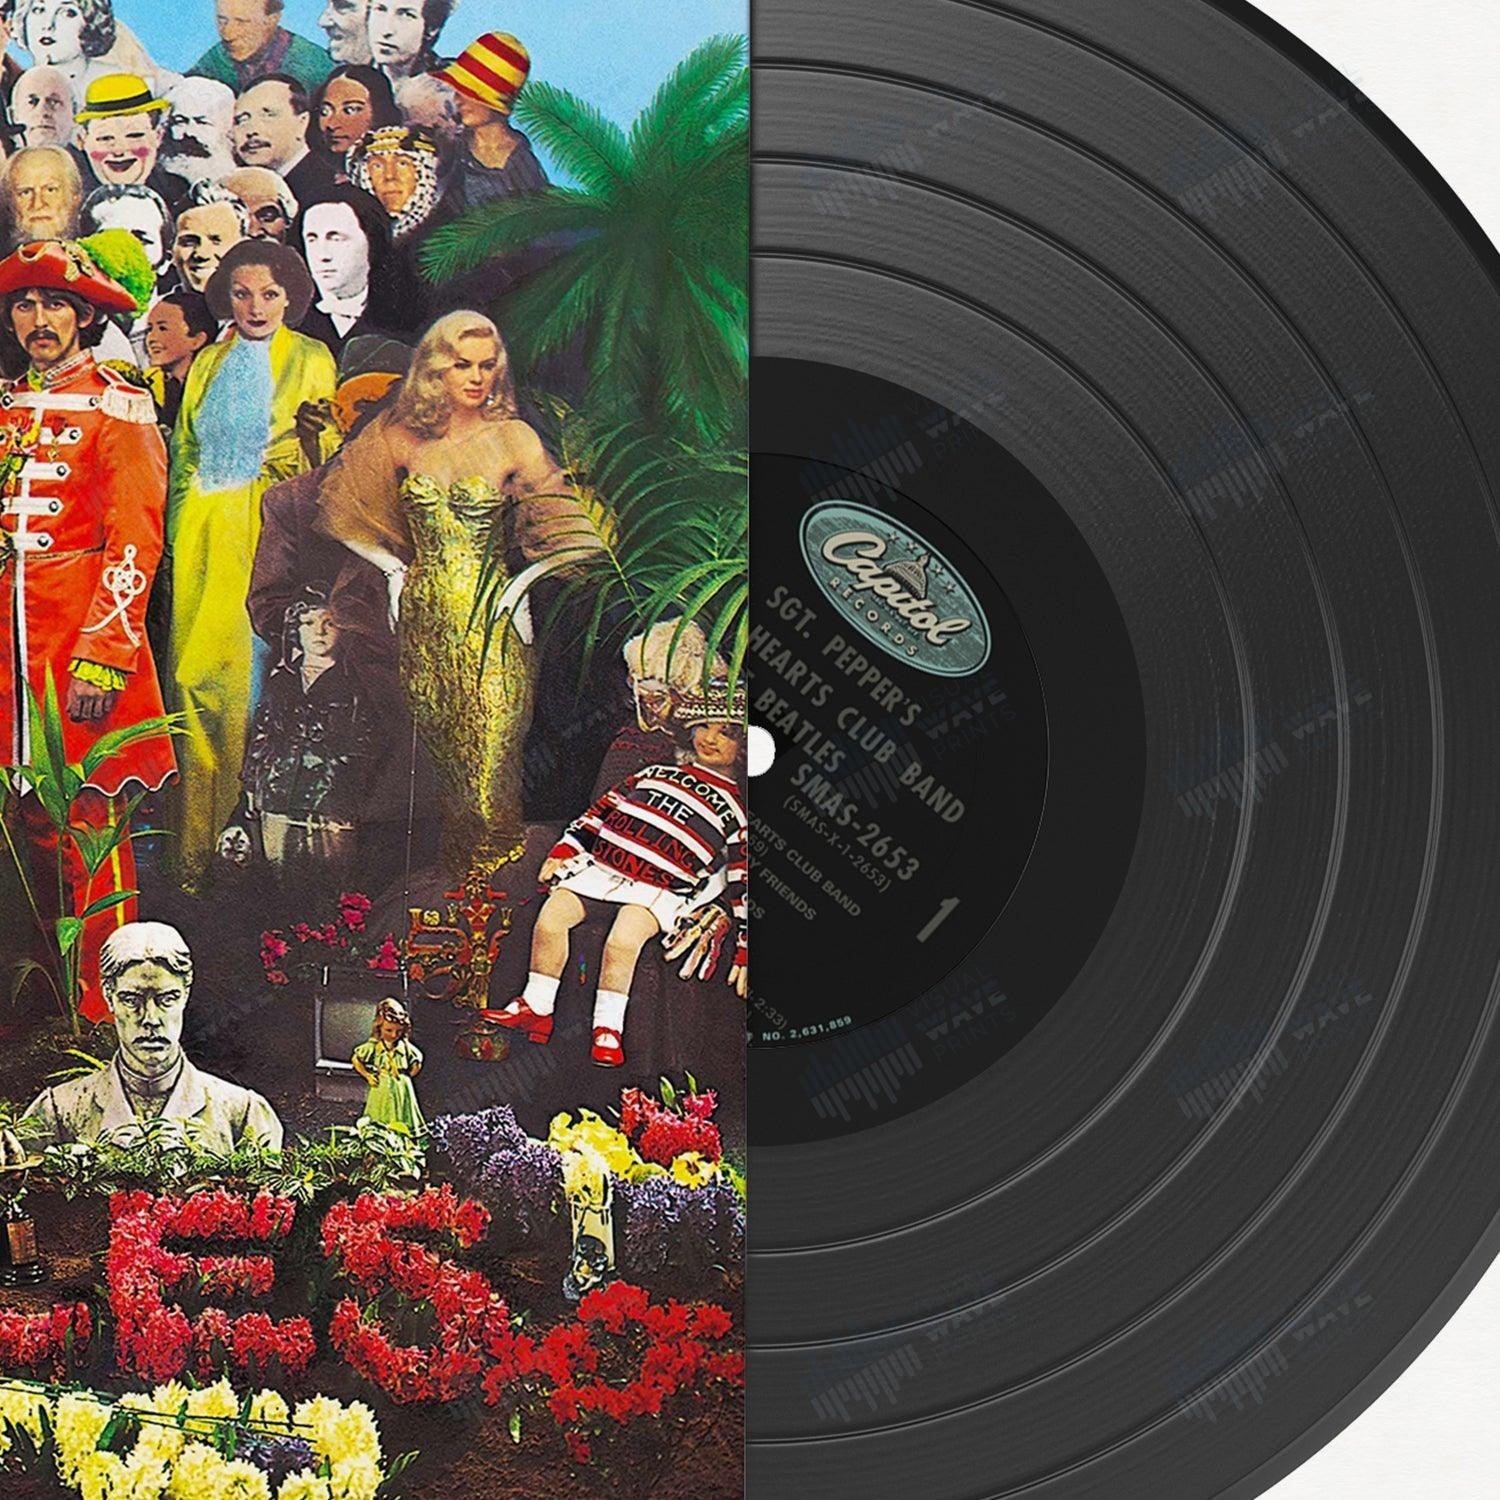 Album Art: Sgt. Pepper's Lonely Hearts Club Band  by The Beatles - Visual Wave Prints